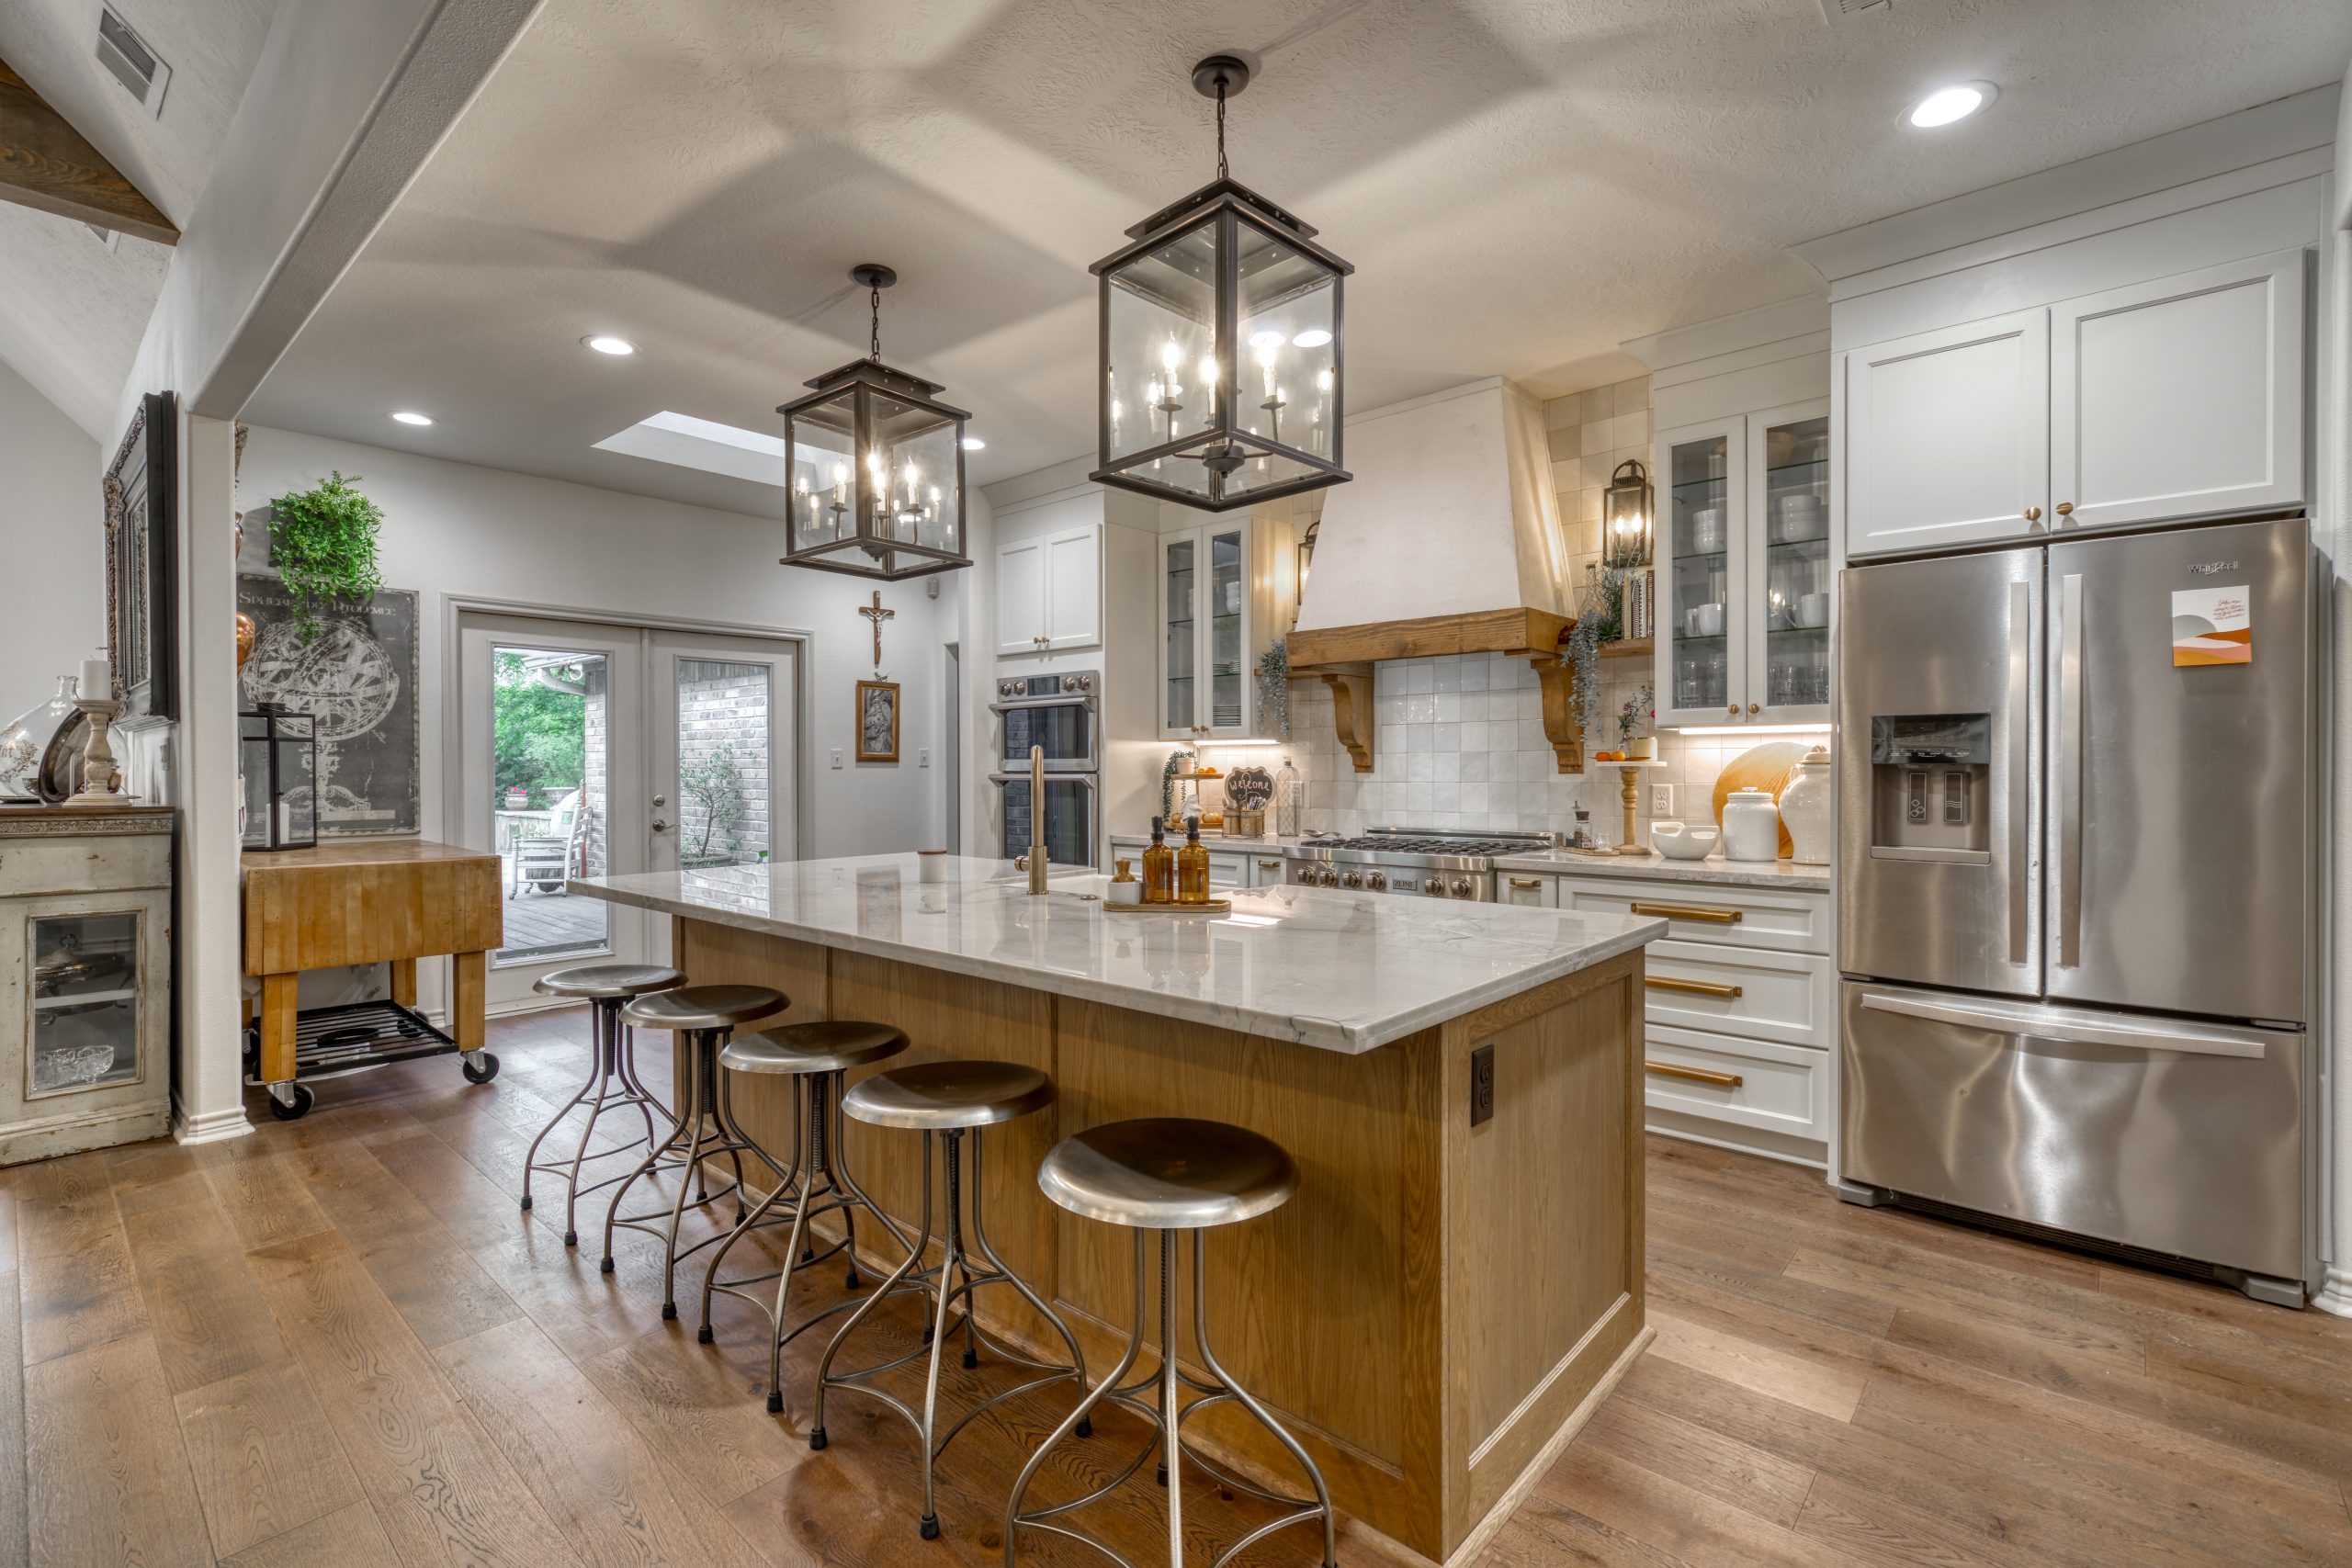 Good Company Construction in Bryan, Texas - Image of Kitchen